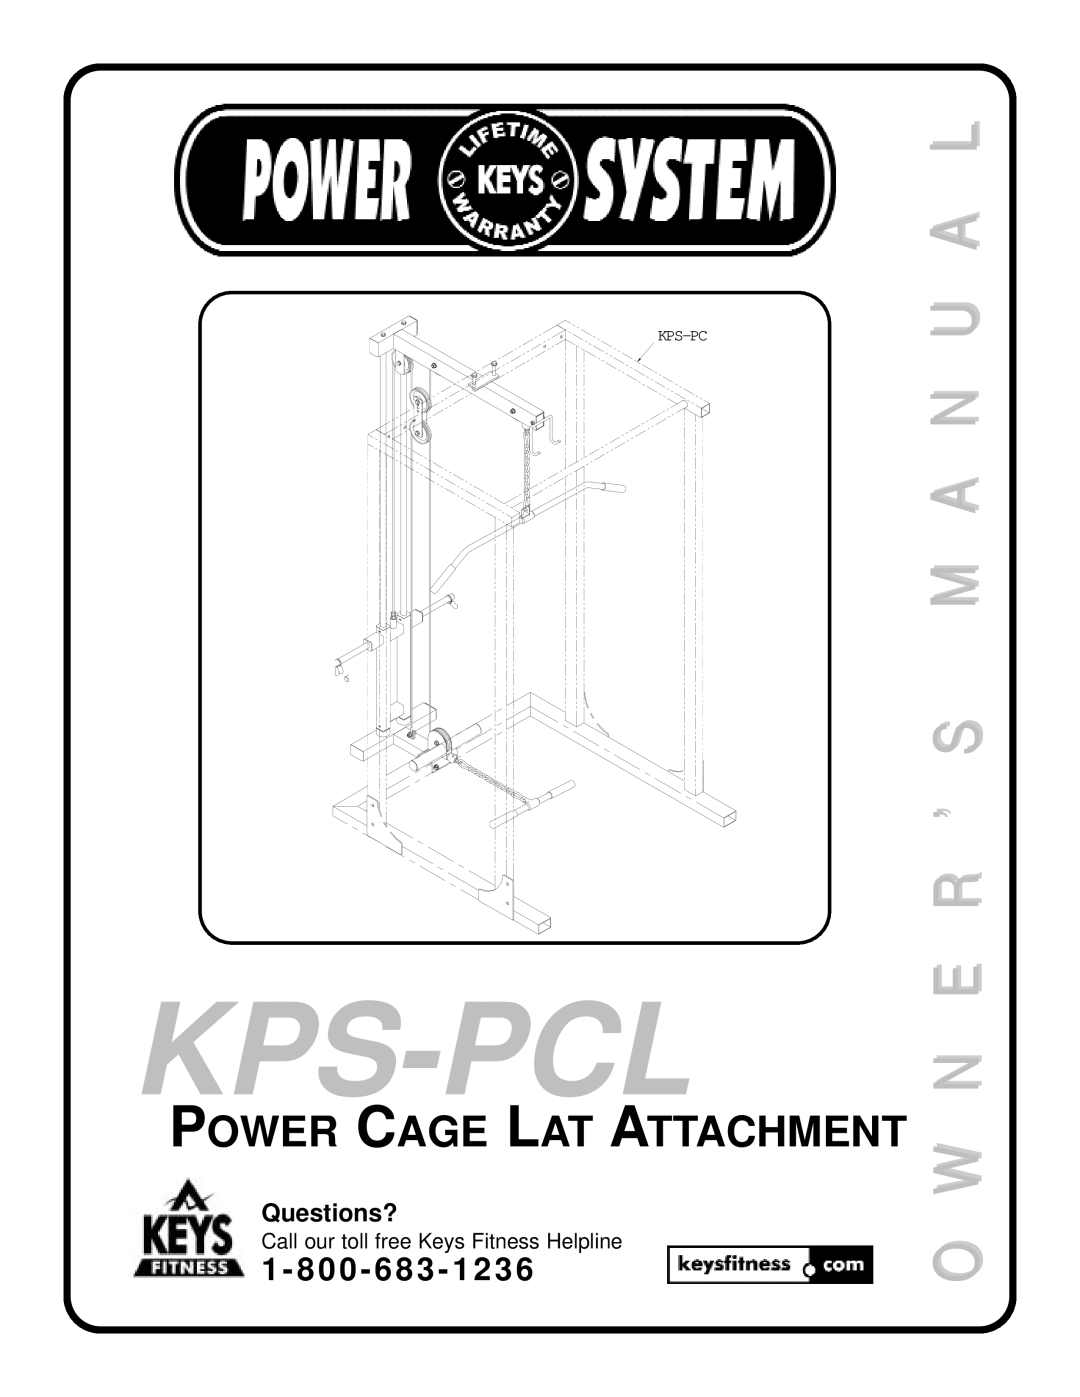 Keys Fitness KPS-PCL manual Questions?, Kps-Pcl, M A N U O W N E R ’ S, Power Cage Lat Attachment 